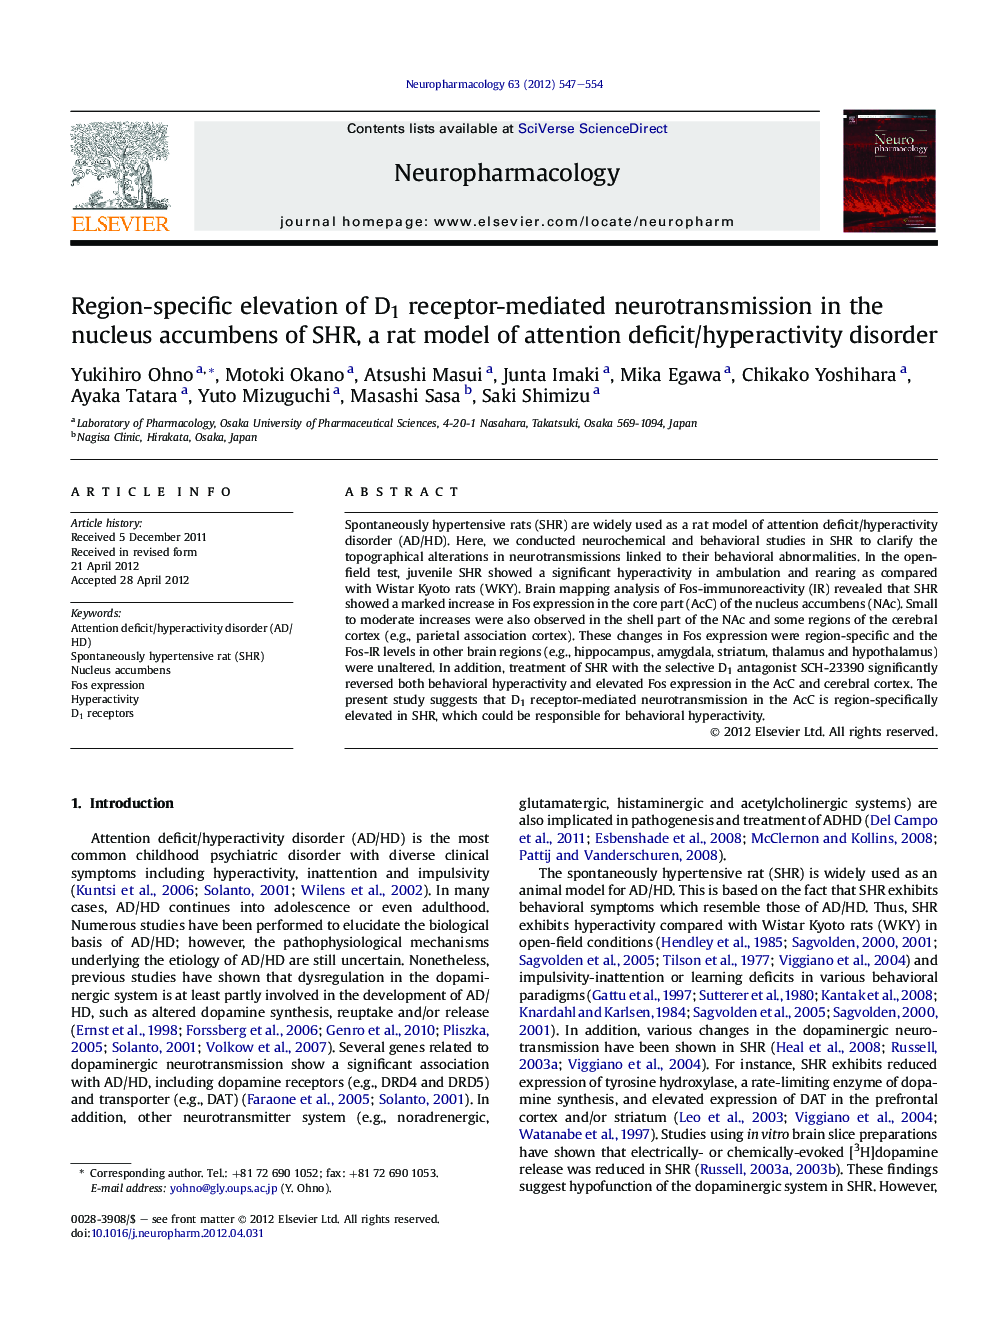 Region-specific elevation of D1 receptor-mediated neurotransmission in the nucleus accumbens of SHR, a rat model of attention deficit/hyperactivity disorder